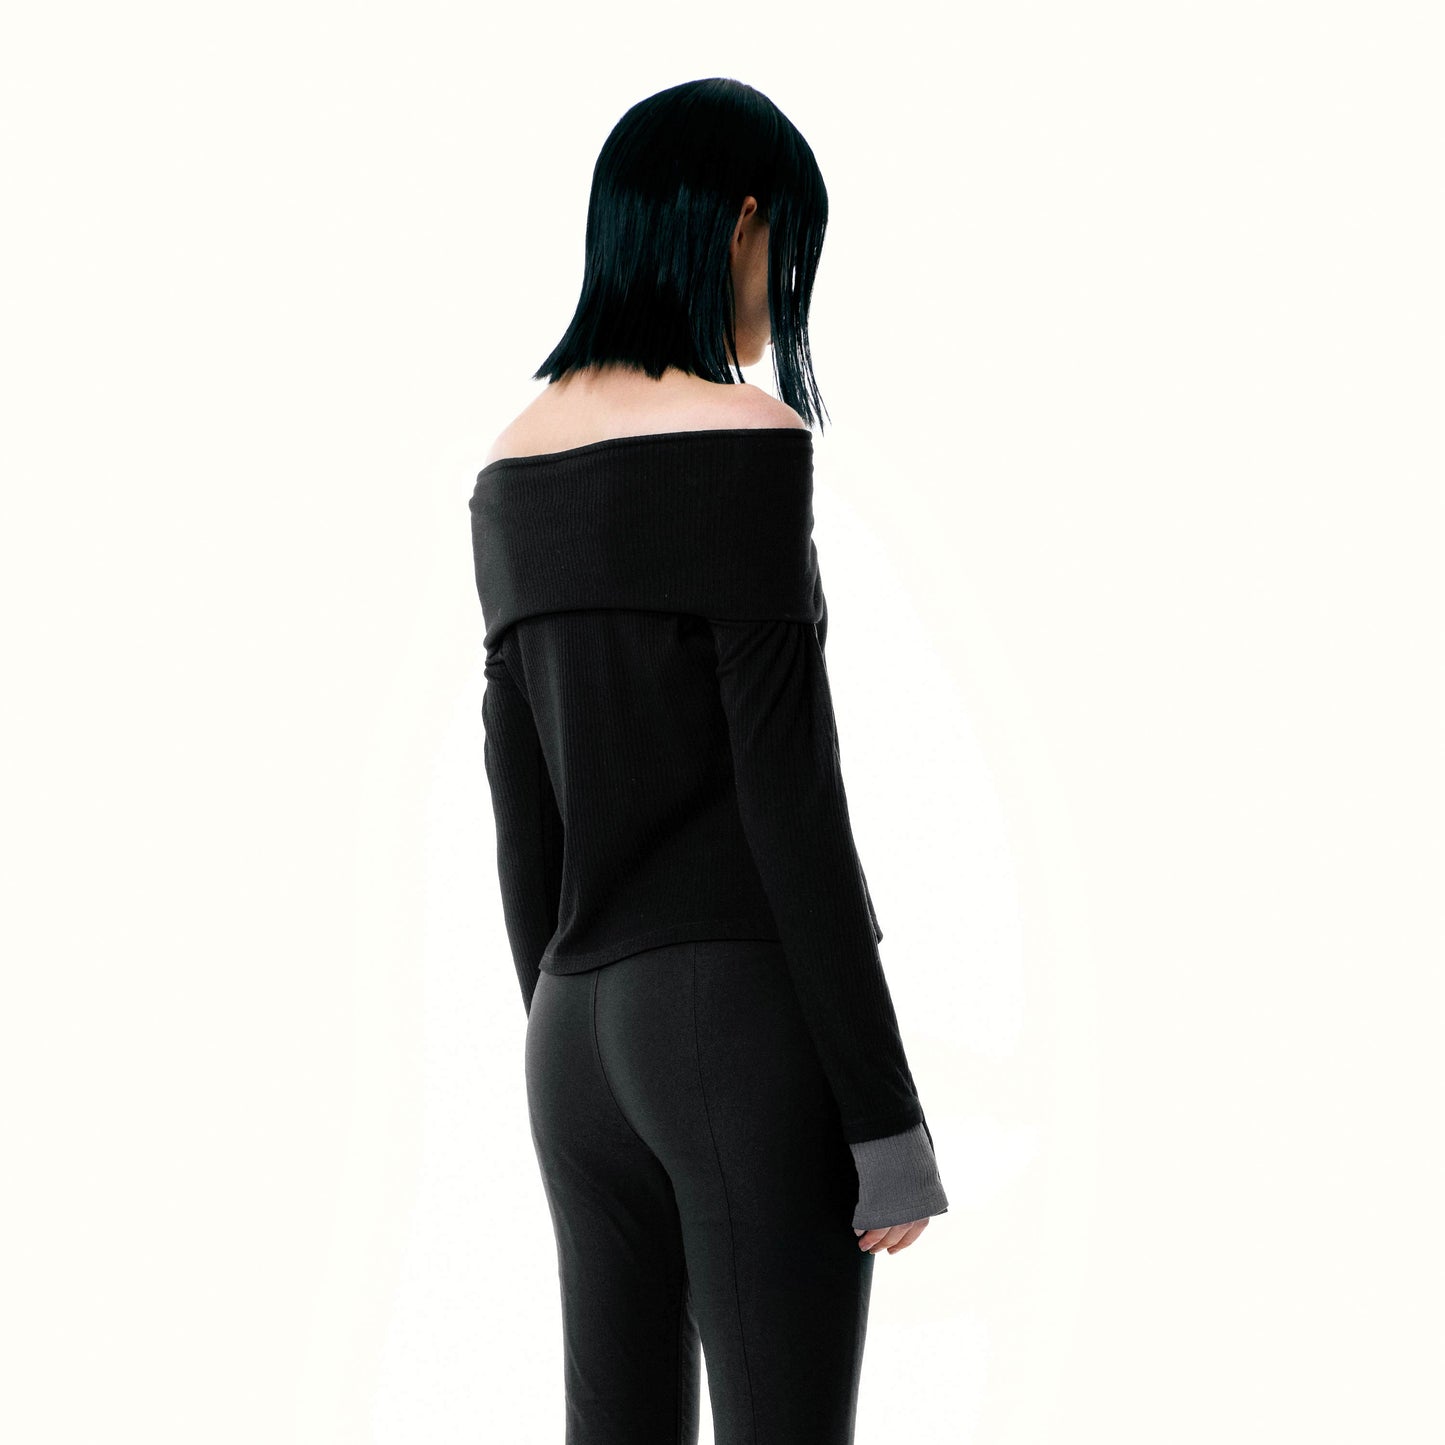 NUTH Black Knit Top